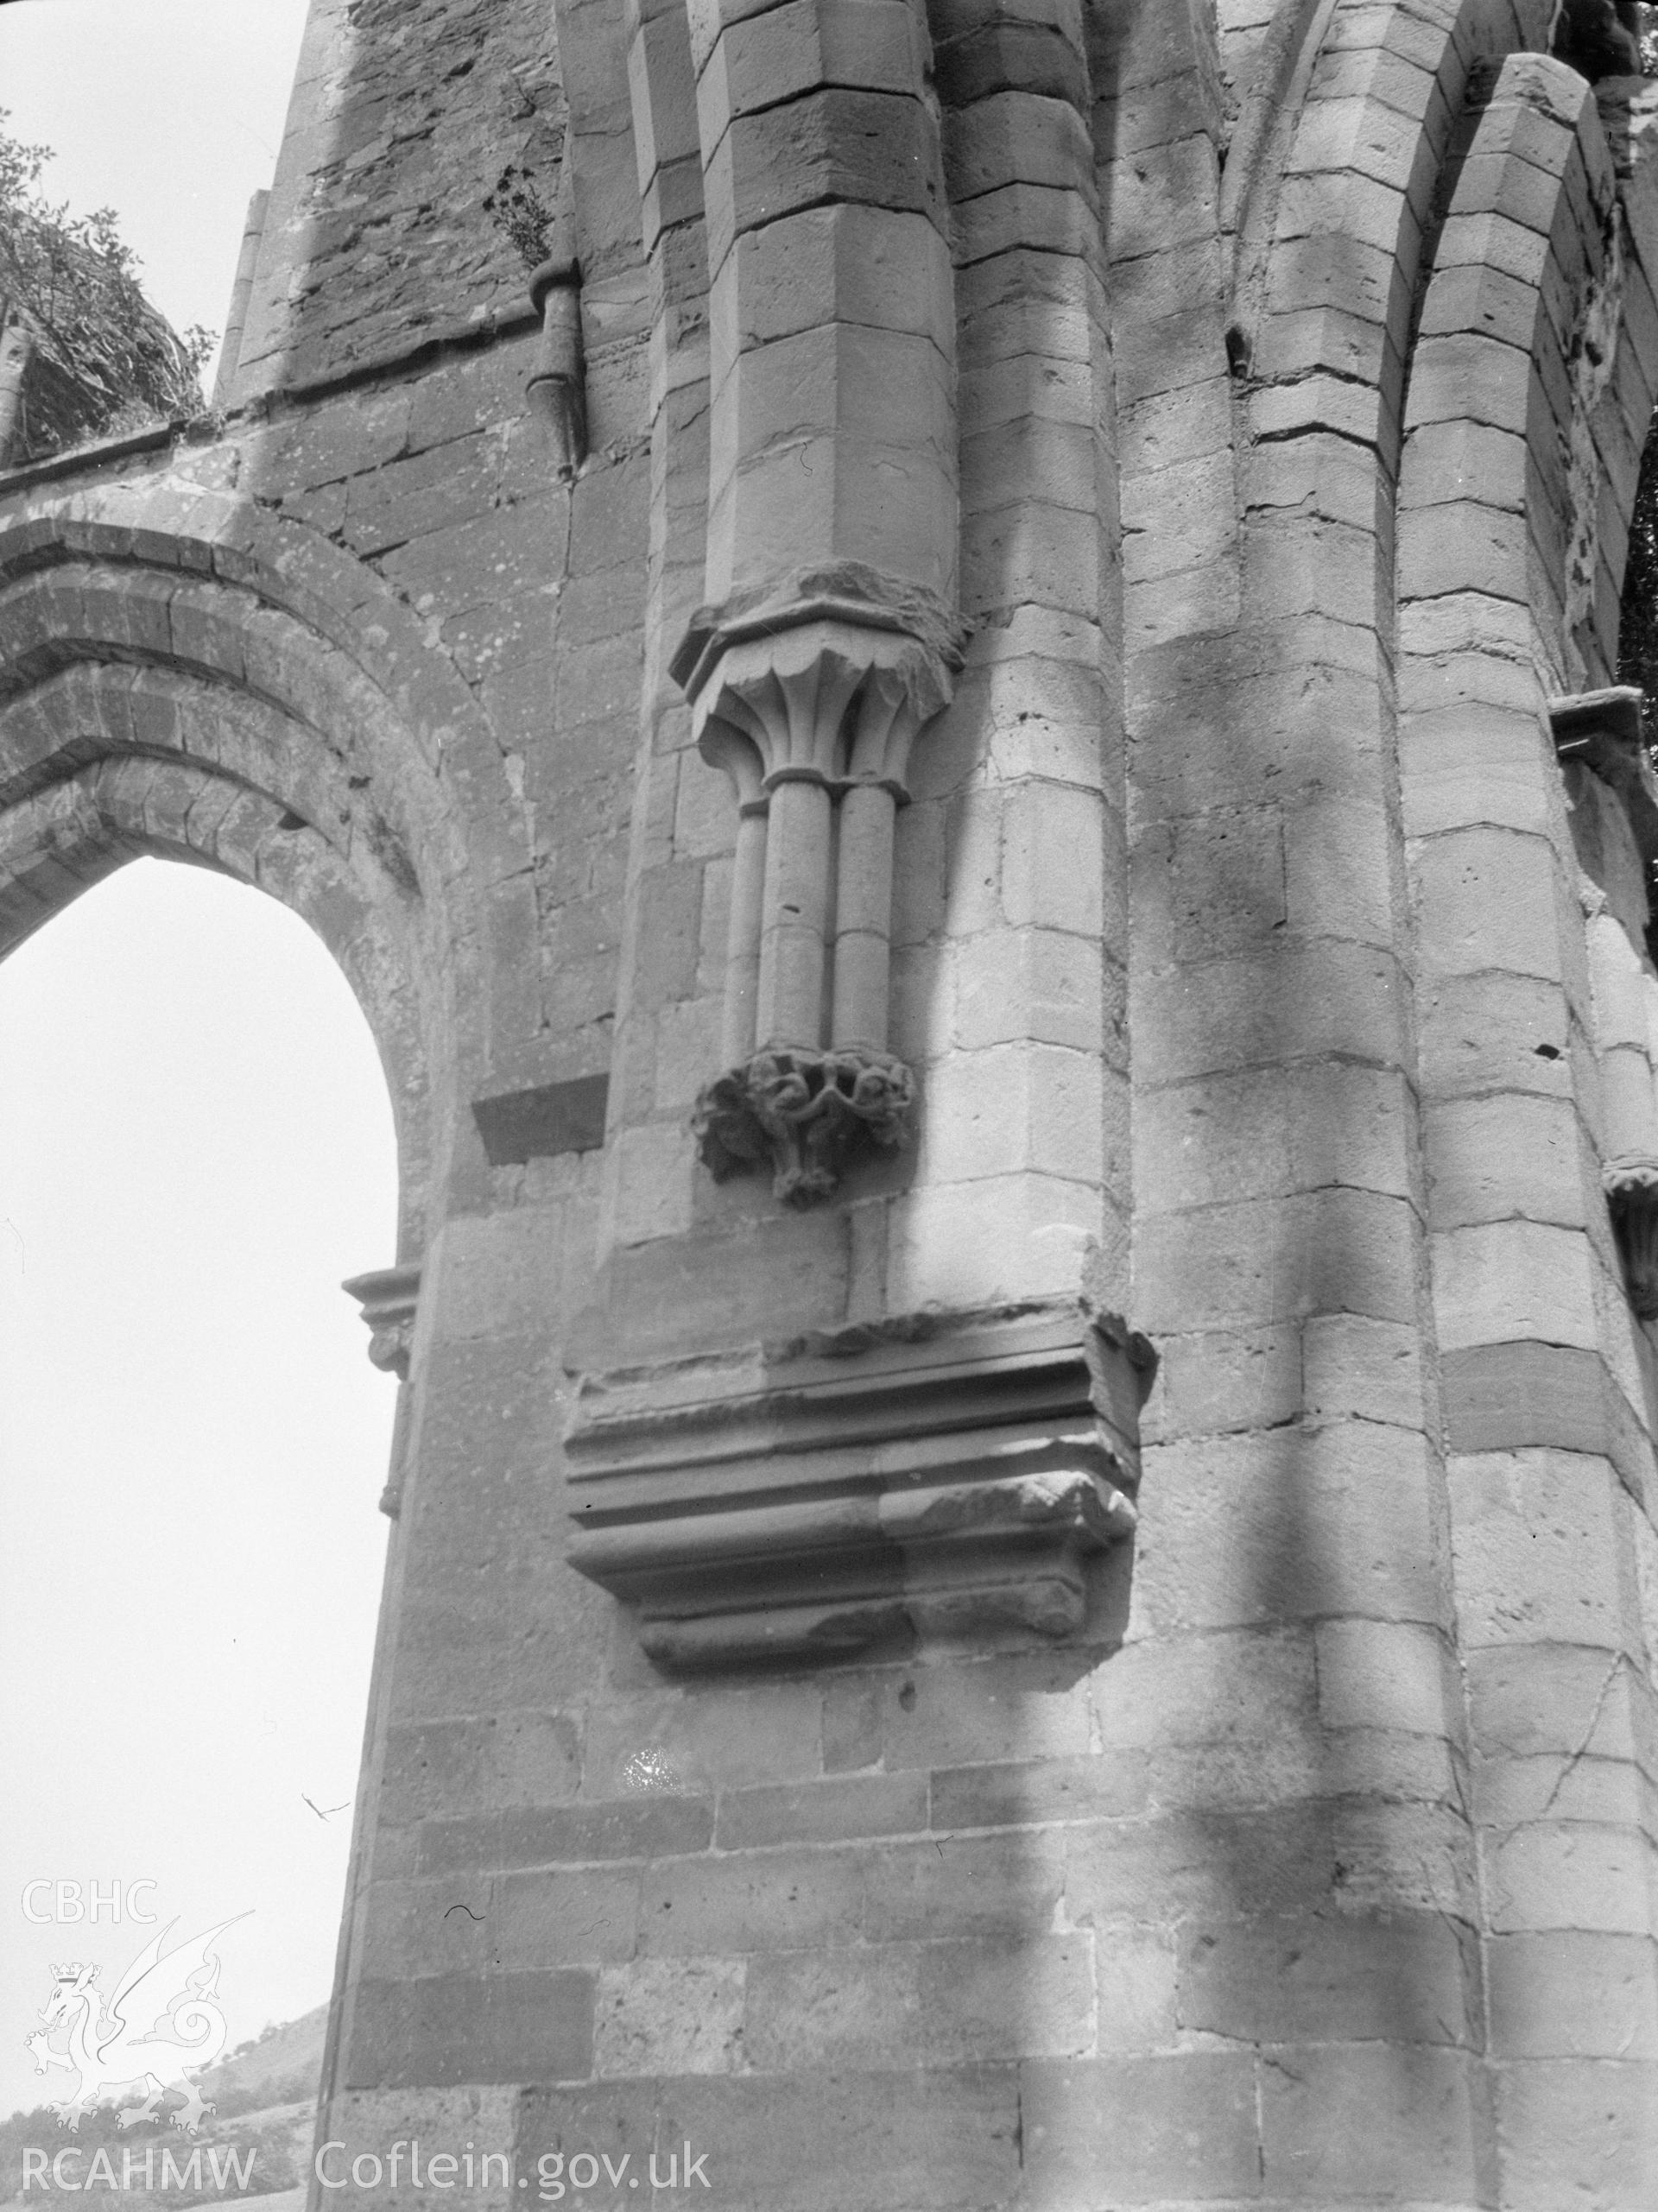 Digital copy of a nitrate negative showing exterior view of north side of chancel arch, Llanthony Abbey. From the National Building Record Postcard Collection.